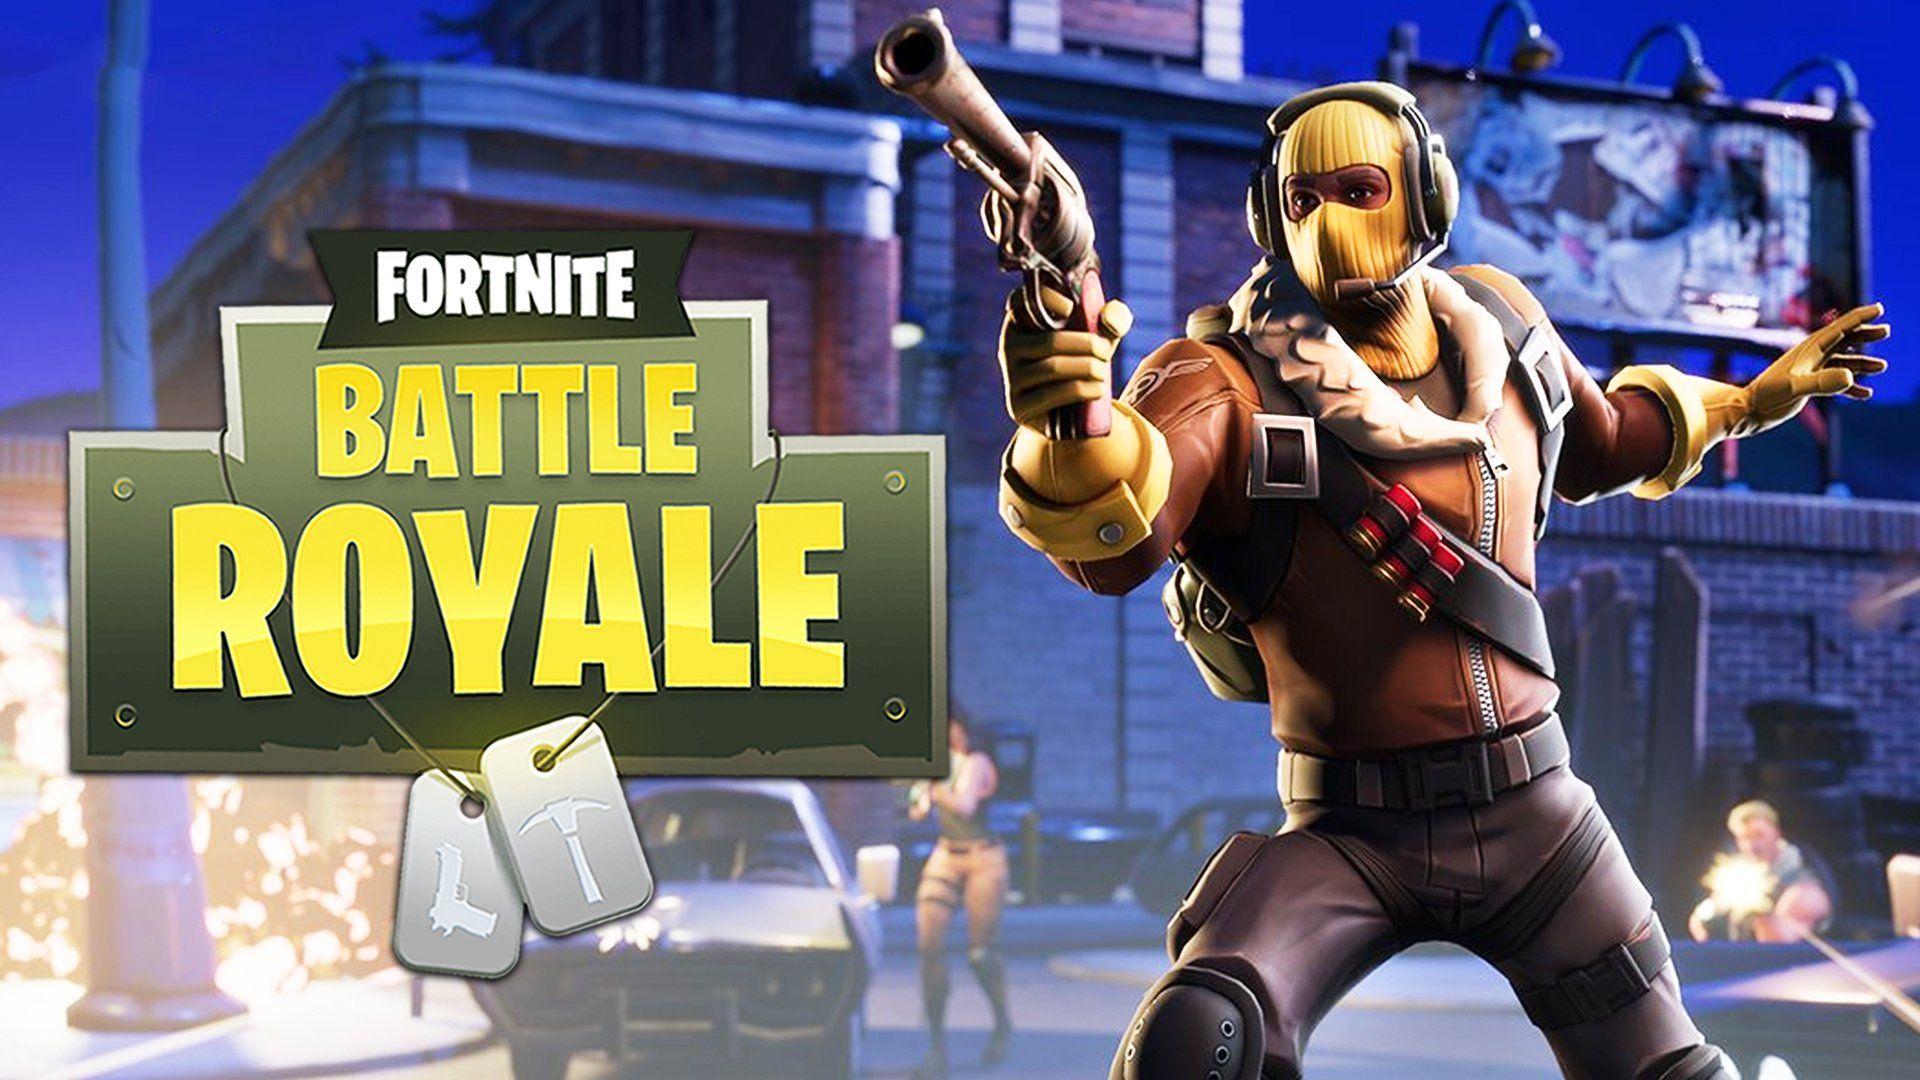 Fortnite Battle Royale Wallpapers Top Free Fortnite Battle Royale Backgrounds WallpaperAccess